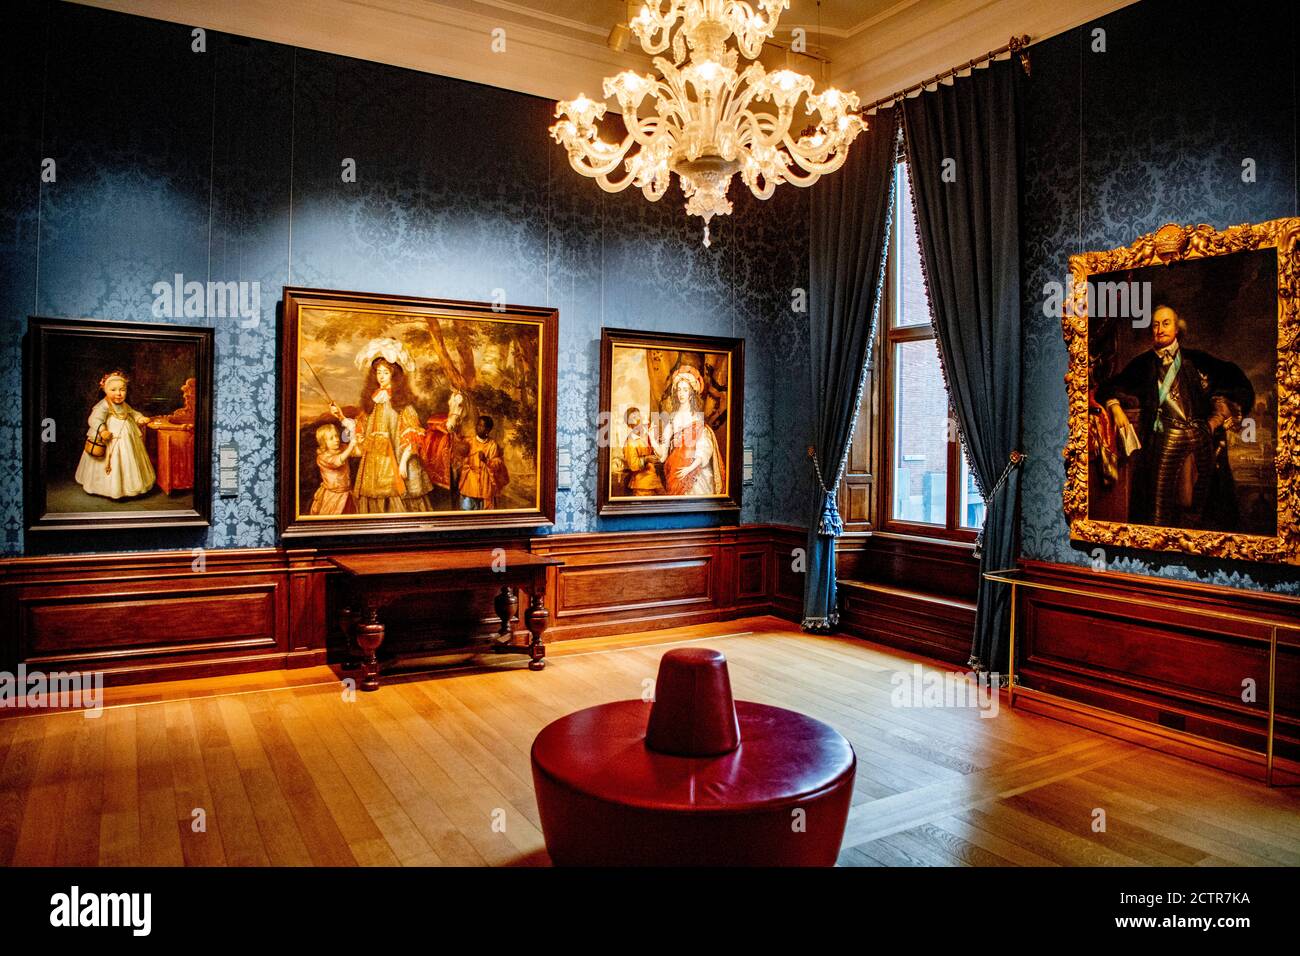 Painting in the new room.The Mauritshuis museum is furnishing a new room for a permanent presentation of works dedicated to Johan Maurits, Count of Nassau-Siegen and client of the Mauritshuis. Stock Photo